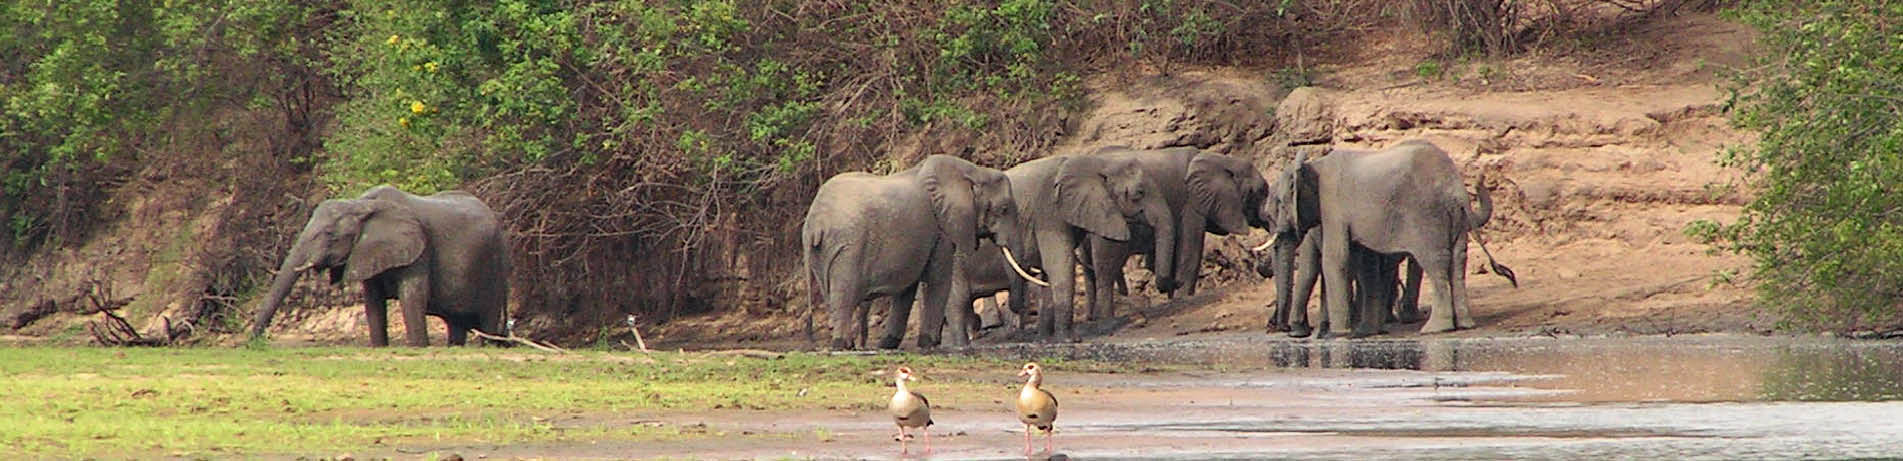 Elephants in the Selous Game Reserve, Tanzania